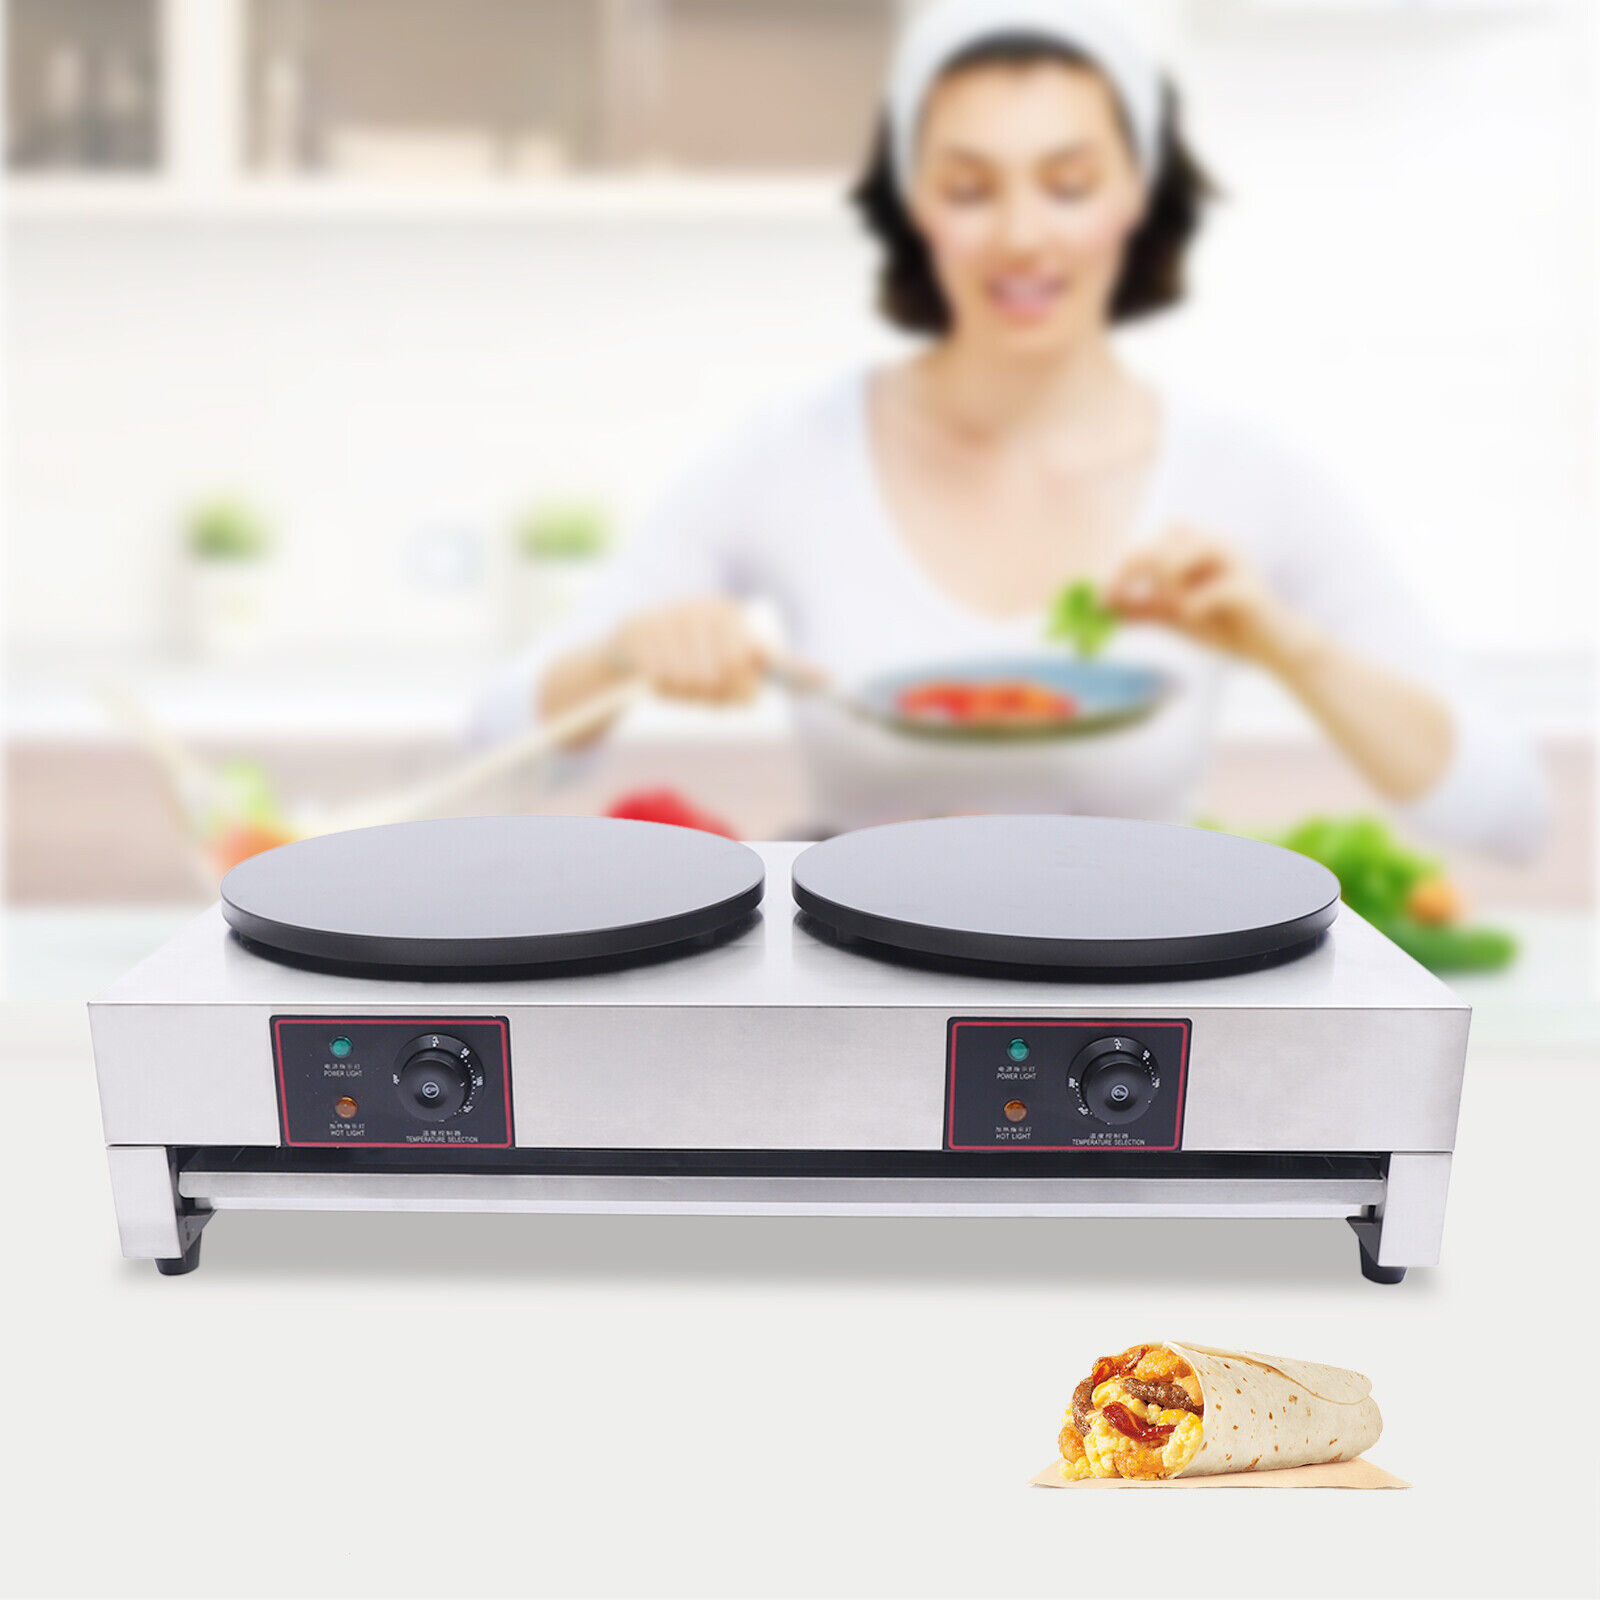 3kw+3kw 40cm 16" Commercial Double Pancake Maker Luxury Electric Crepe Unbranded Does Not Apply - фотография #18